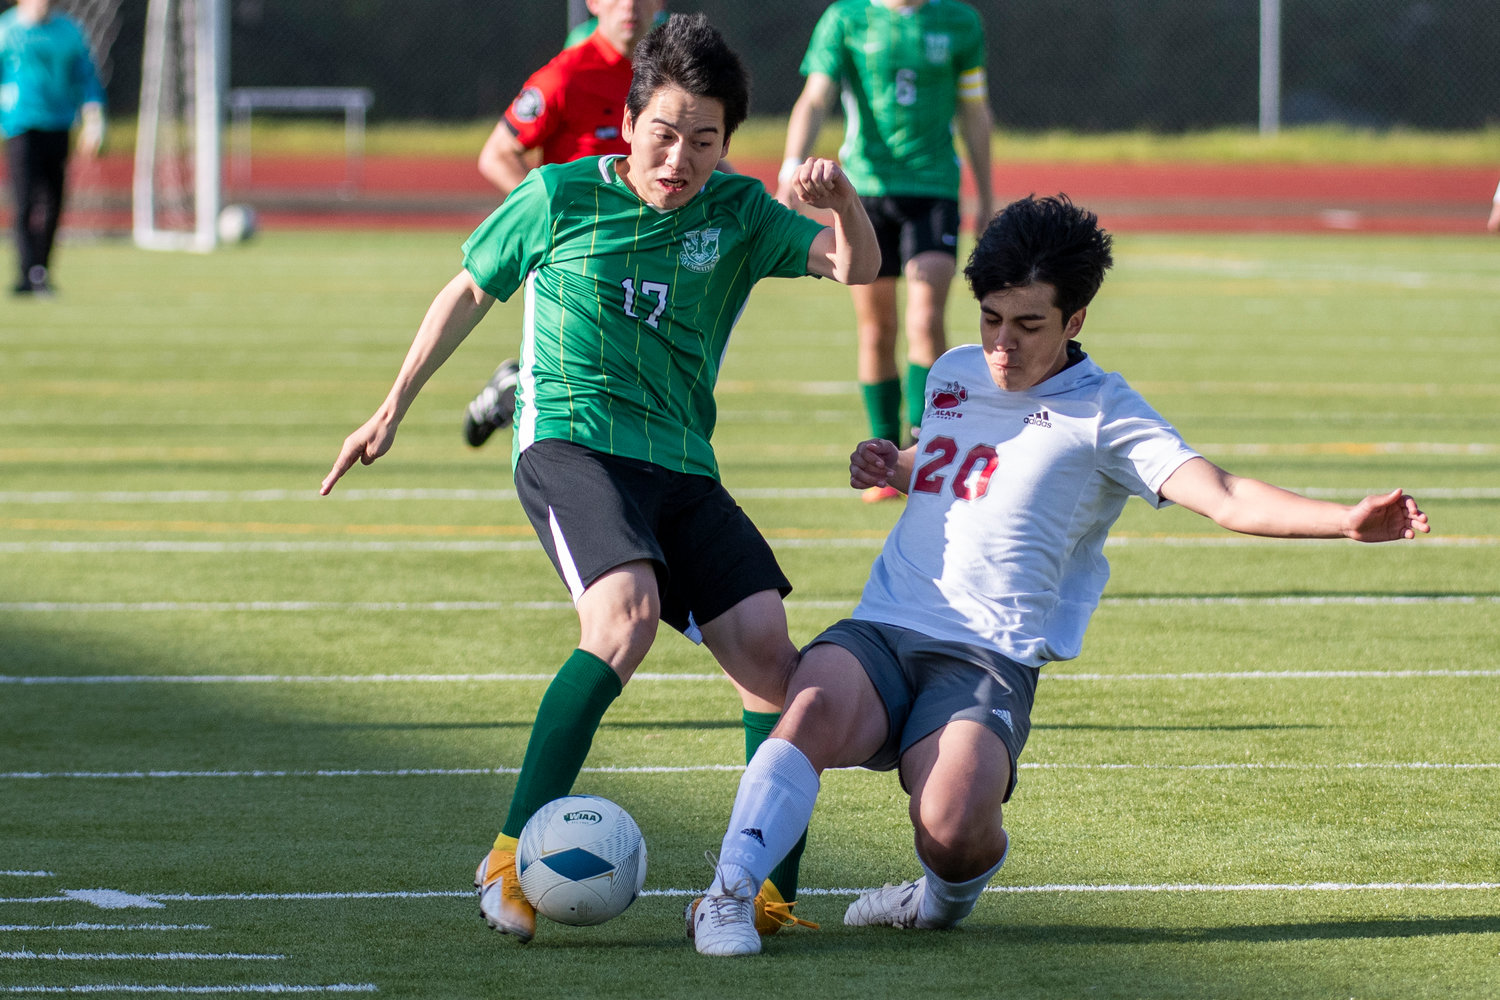 Tumwater's Koki Shibata (17) and W.F. West's Xavier Flores (20) battle for possession during the district semifinals on May 12.